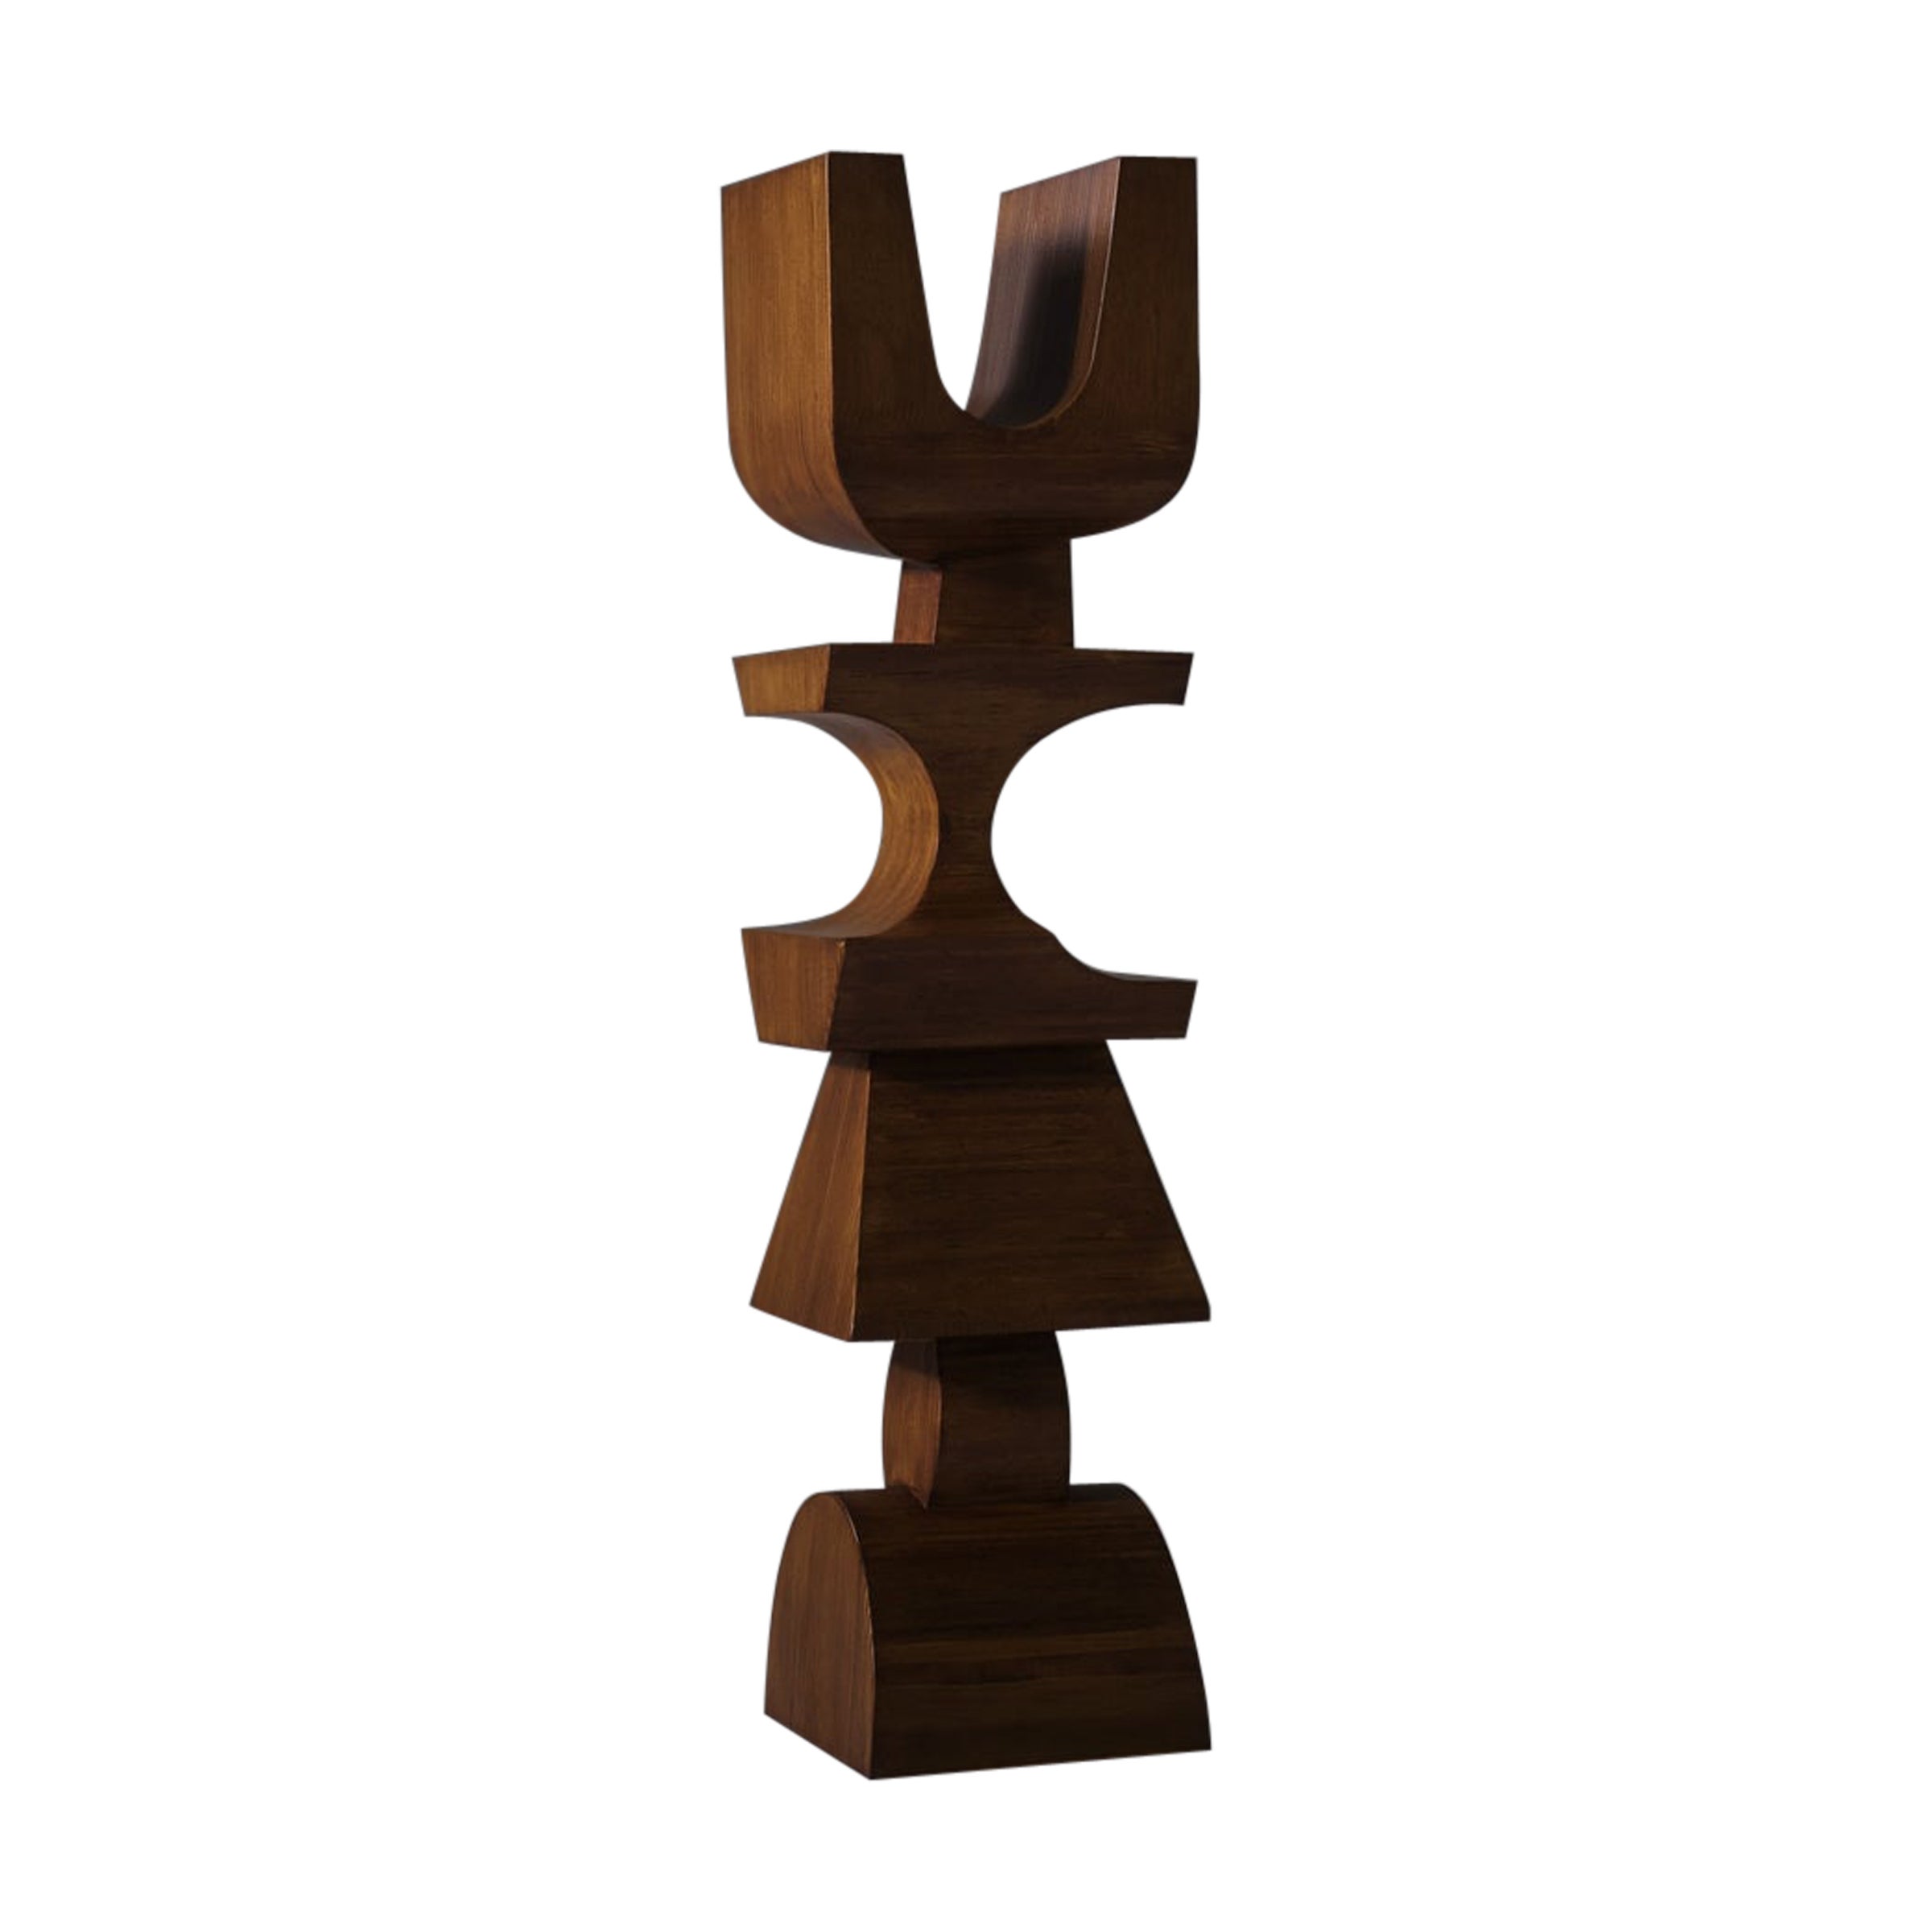 Nerone Ceccarelli abstract wooden Totem sculpture, Italy 1970s For Sale